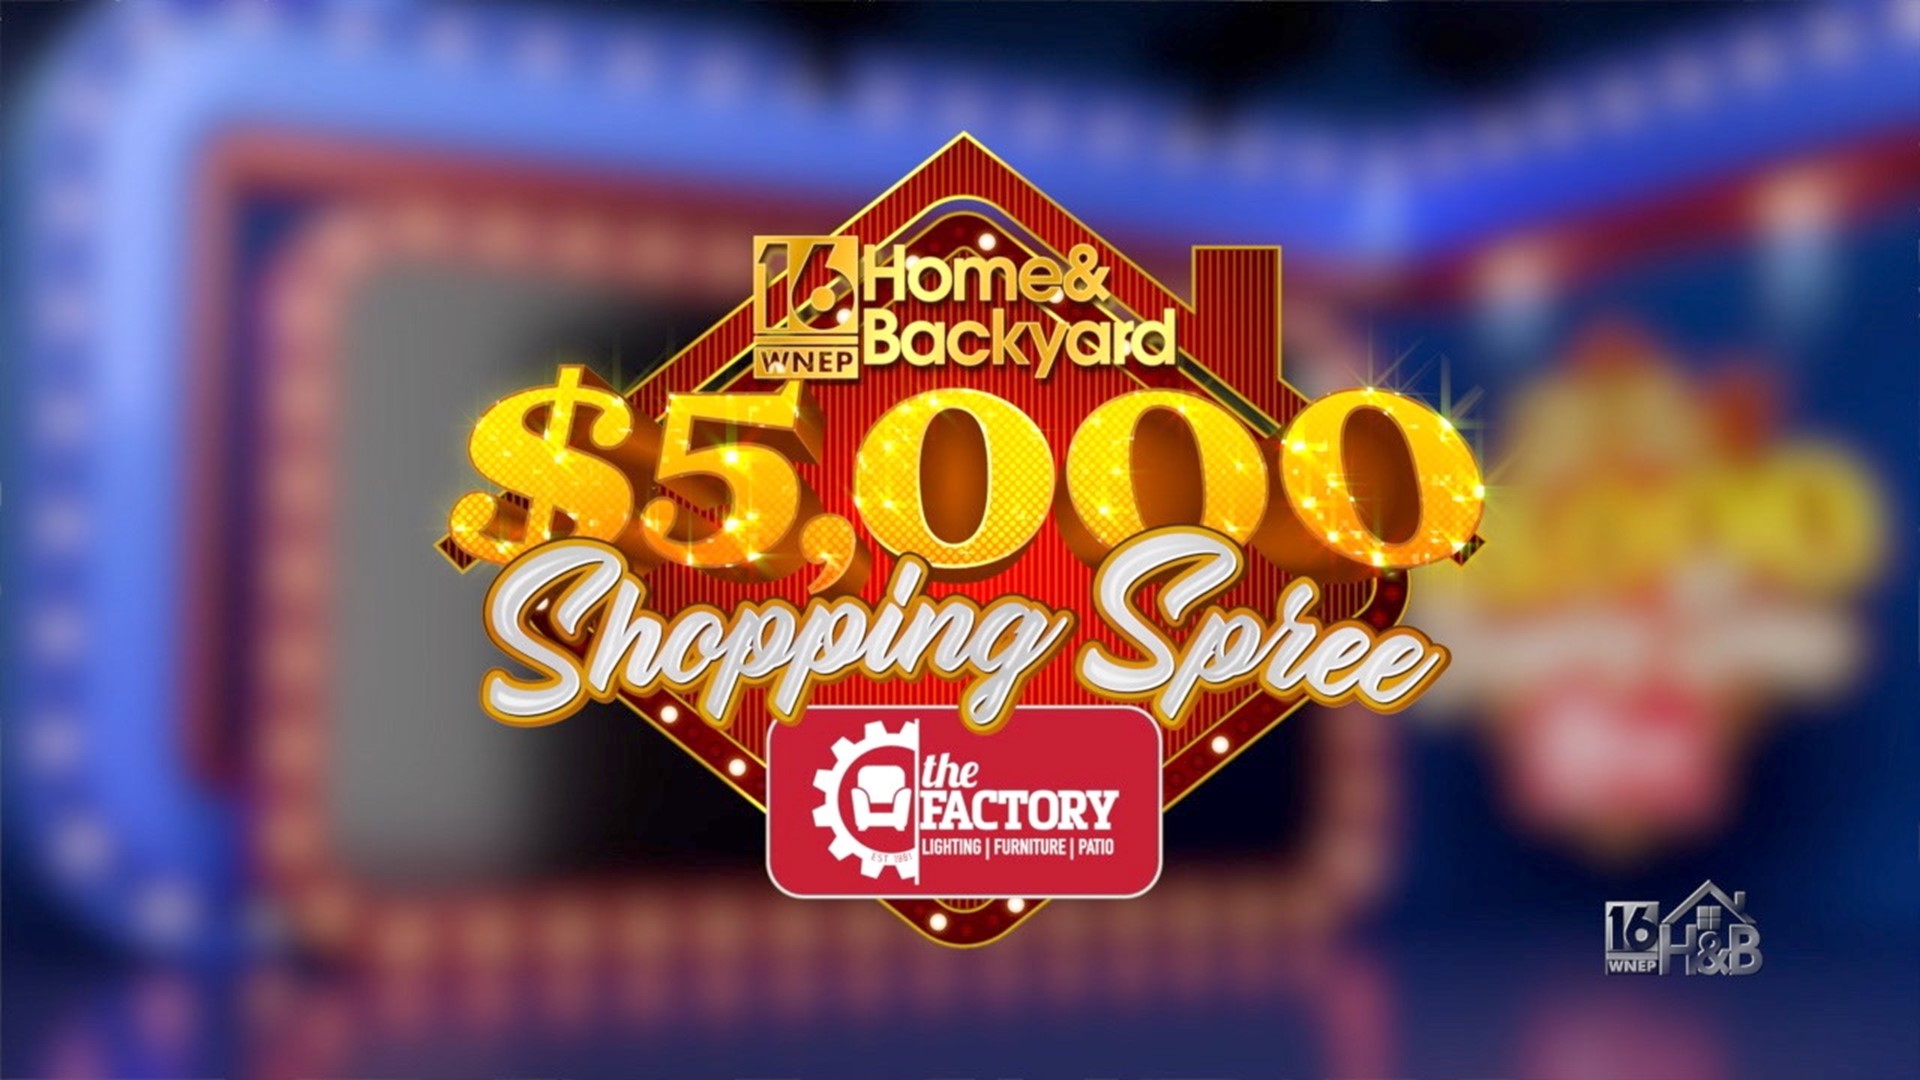 Prize Drawing for the Home & Backyard $5000 Shopping Spree Courtesy of the Factory